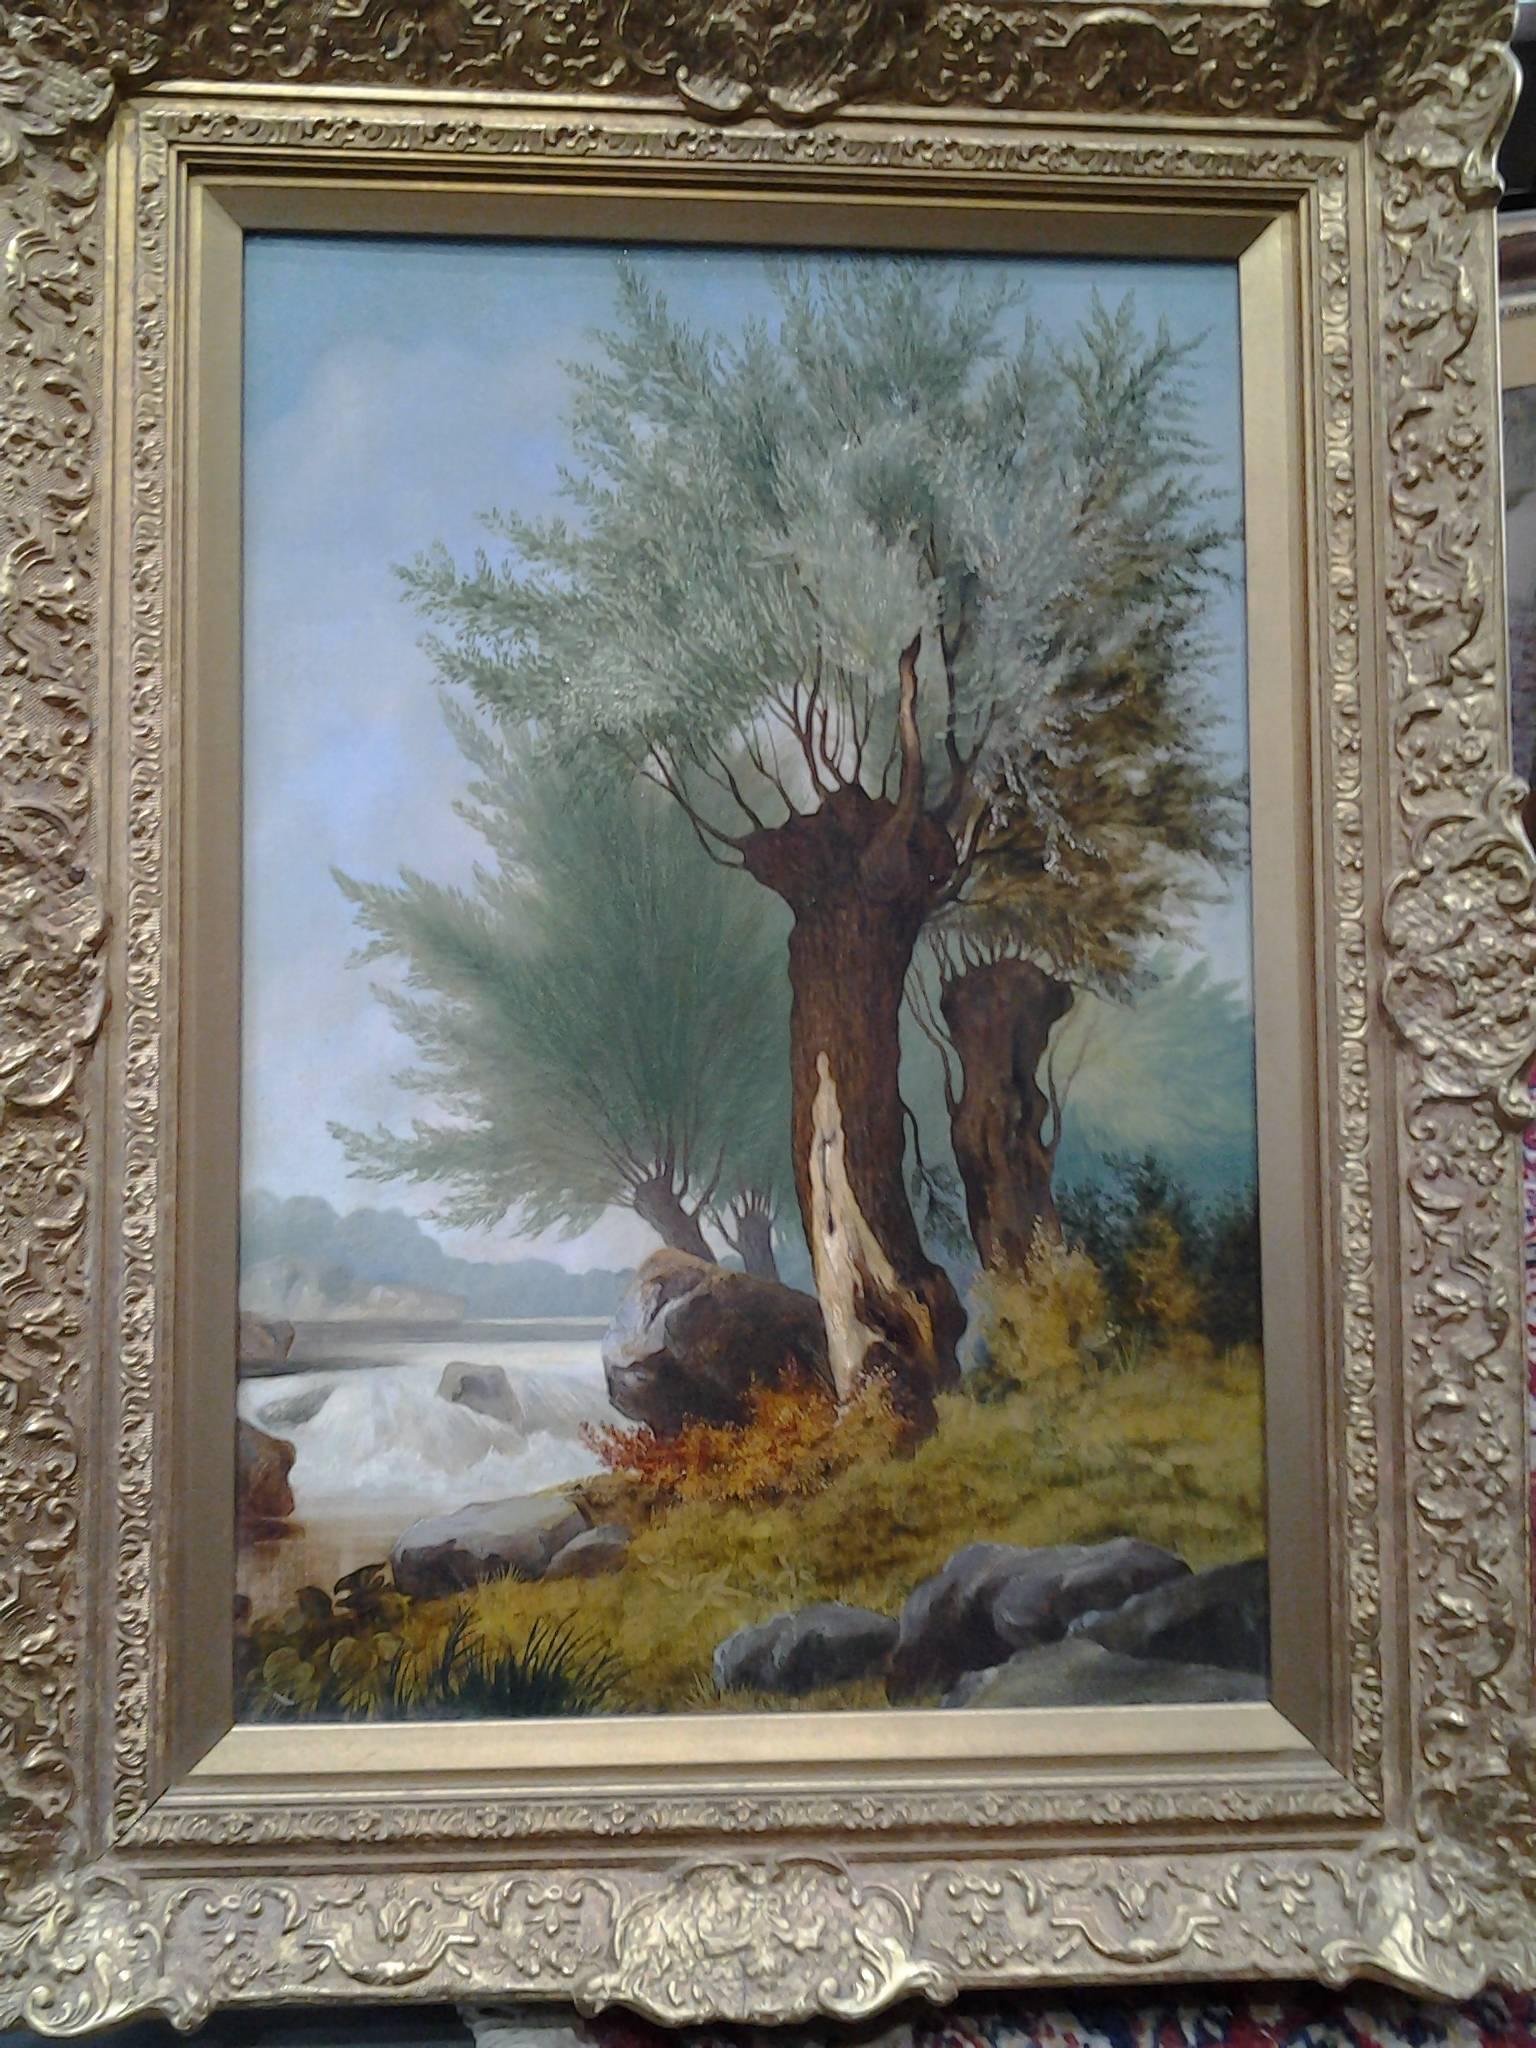 Pollarded Willows on the riverbank of the Thames - Painting by Henry John Boddington